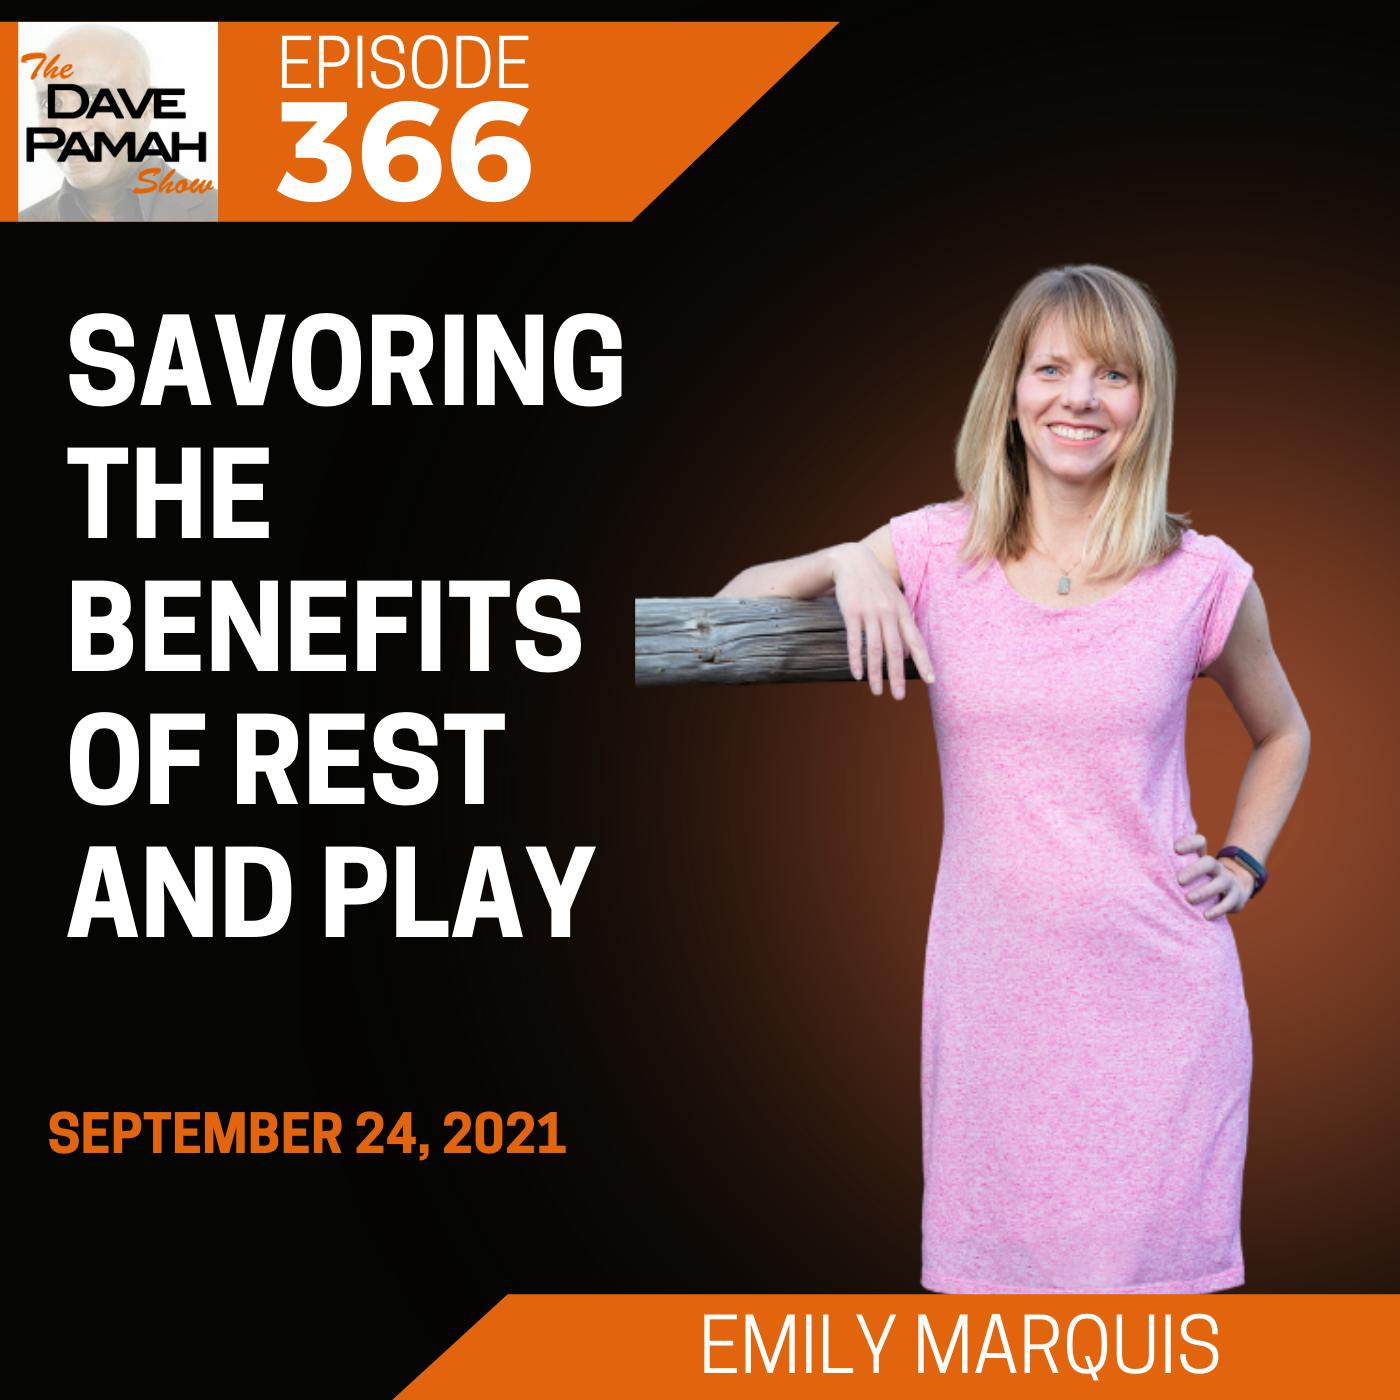 Savoring the Benefits of Rest and Play with Emily Marquis Image